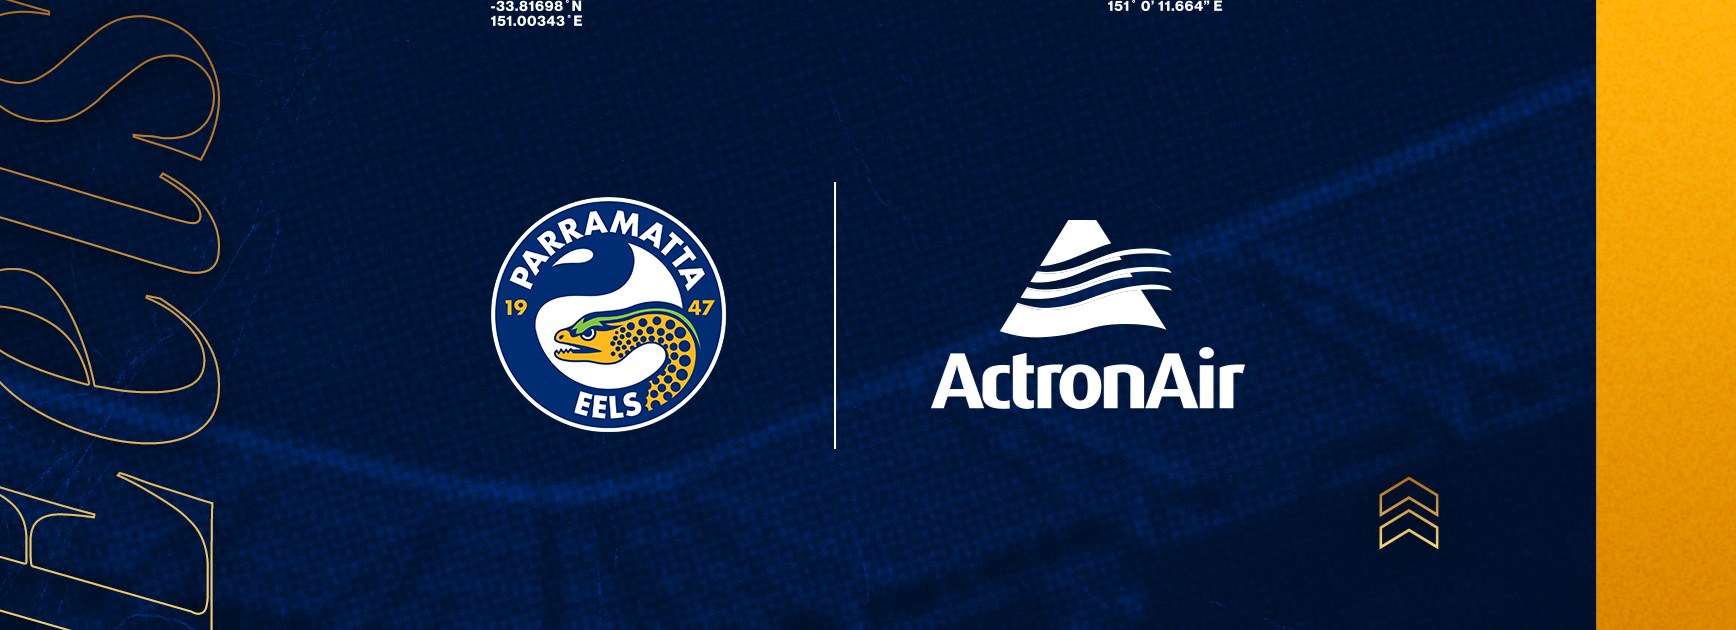 Parramatta Eels announce three-year partnership extension with ActronAir